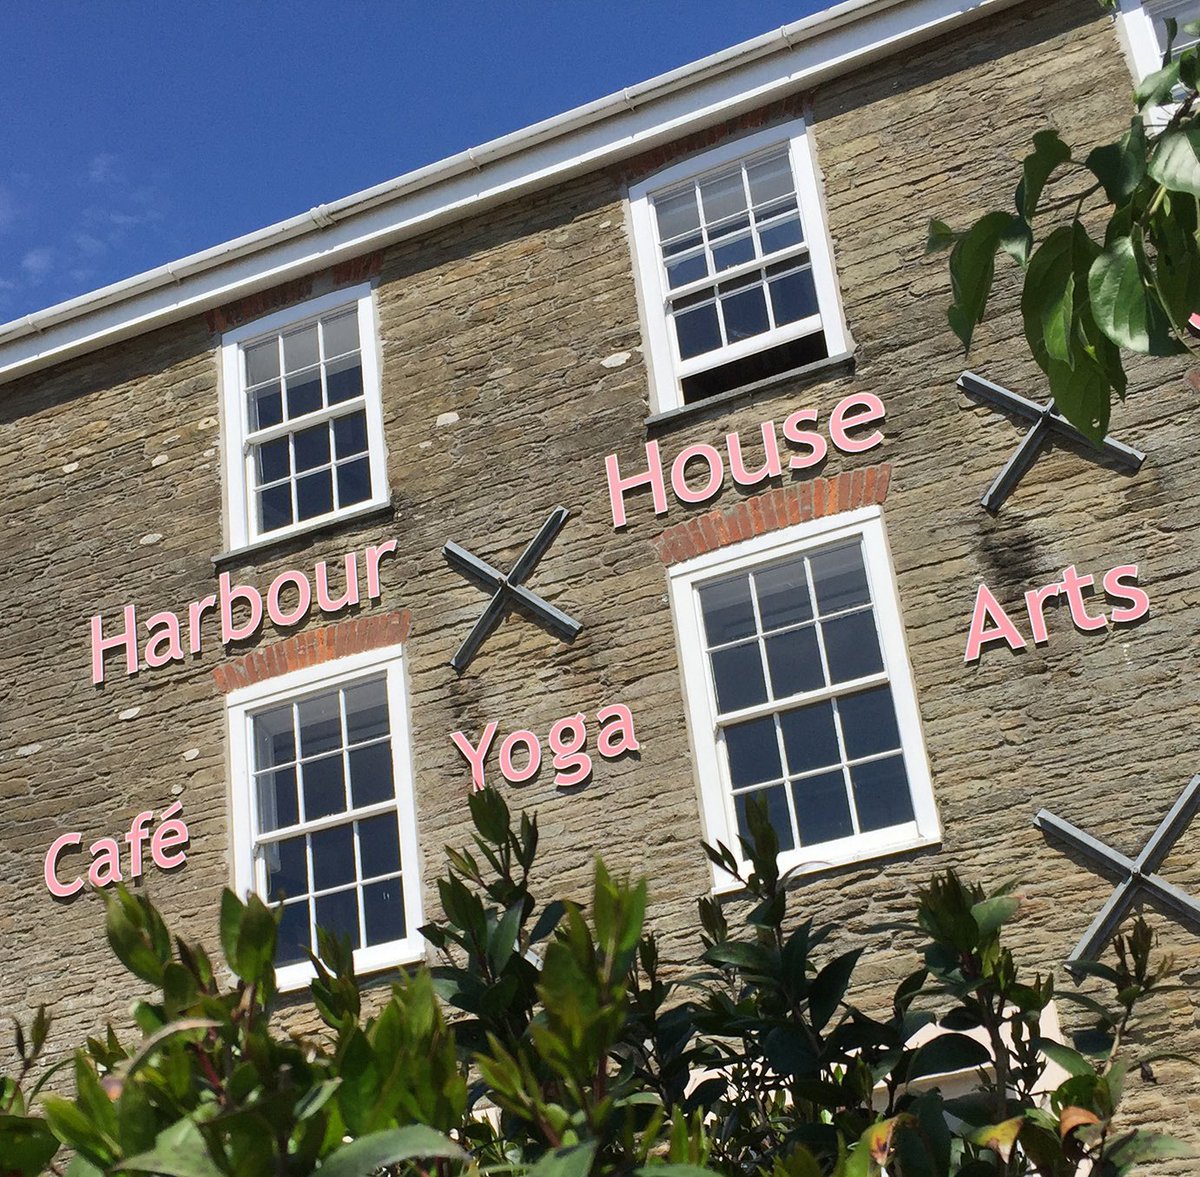 We are looking forward to our #freeValuation day @HHArtsandYoga 
10am-2pm on 7 September
on The Promenade in #Kingsbridge #southDevon - A delightful spot for our #valuationday! 
noonans.co.uk